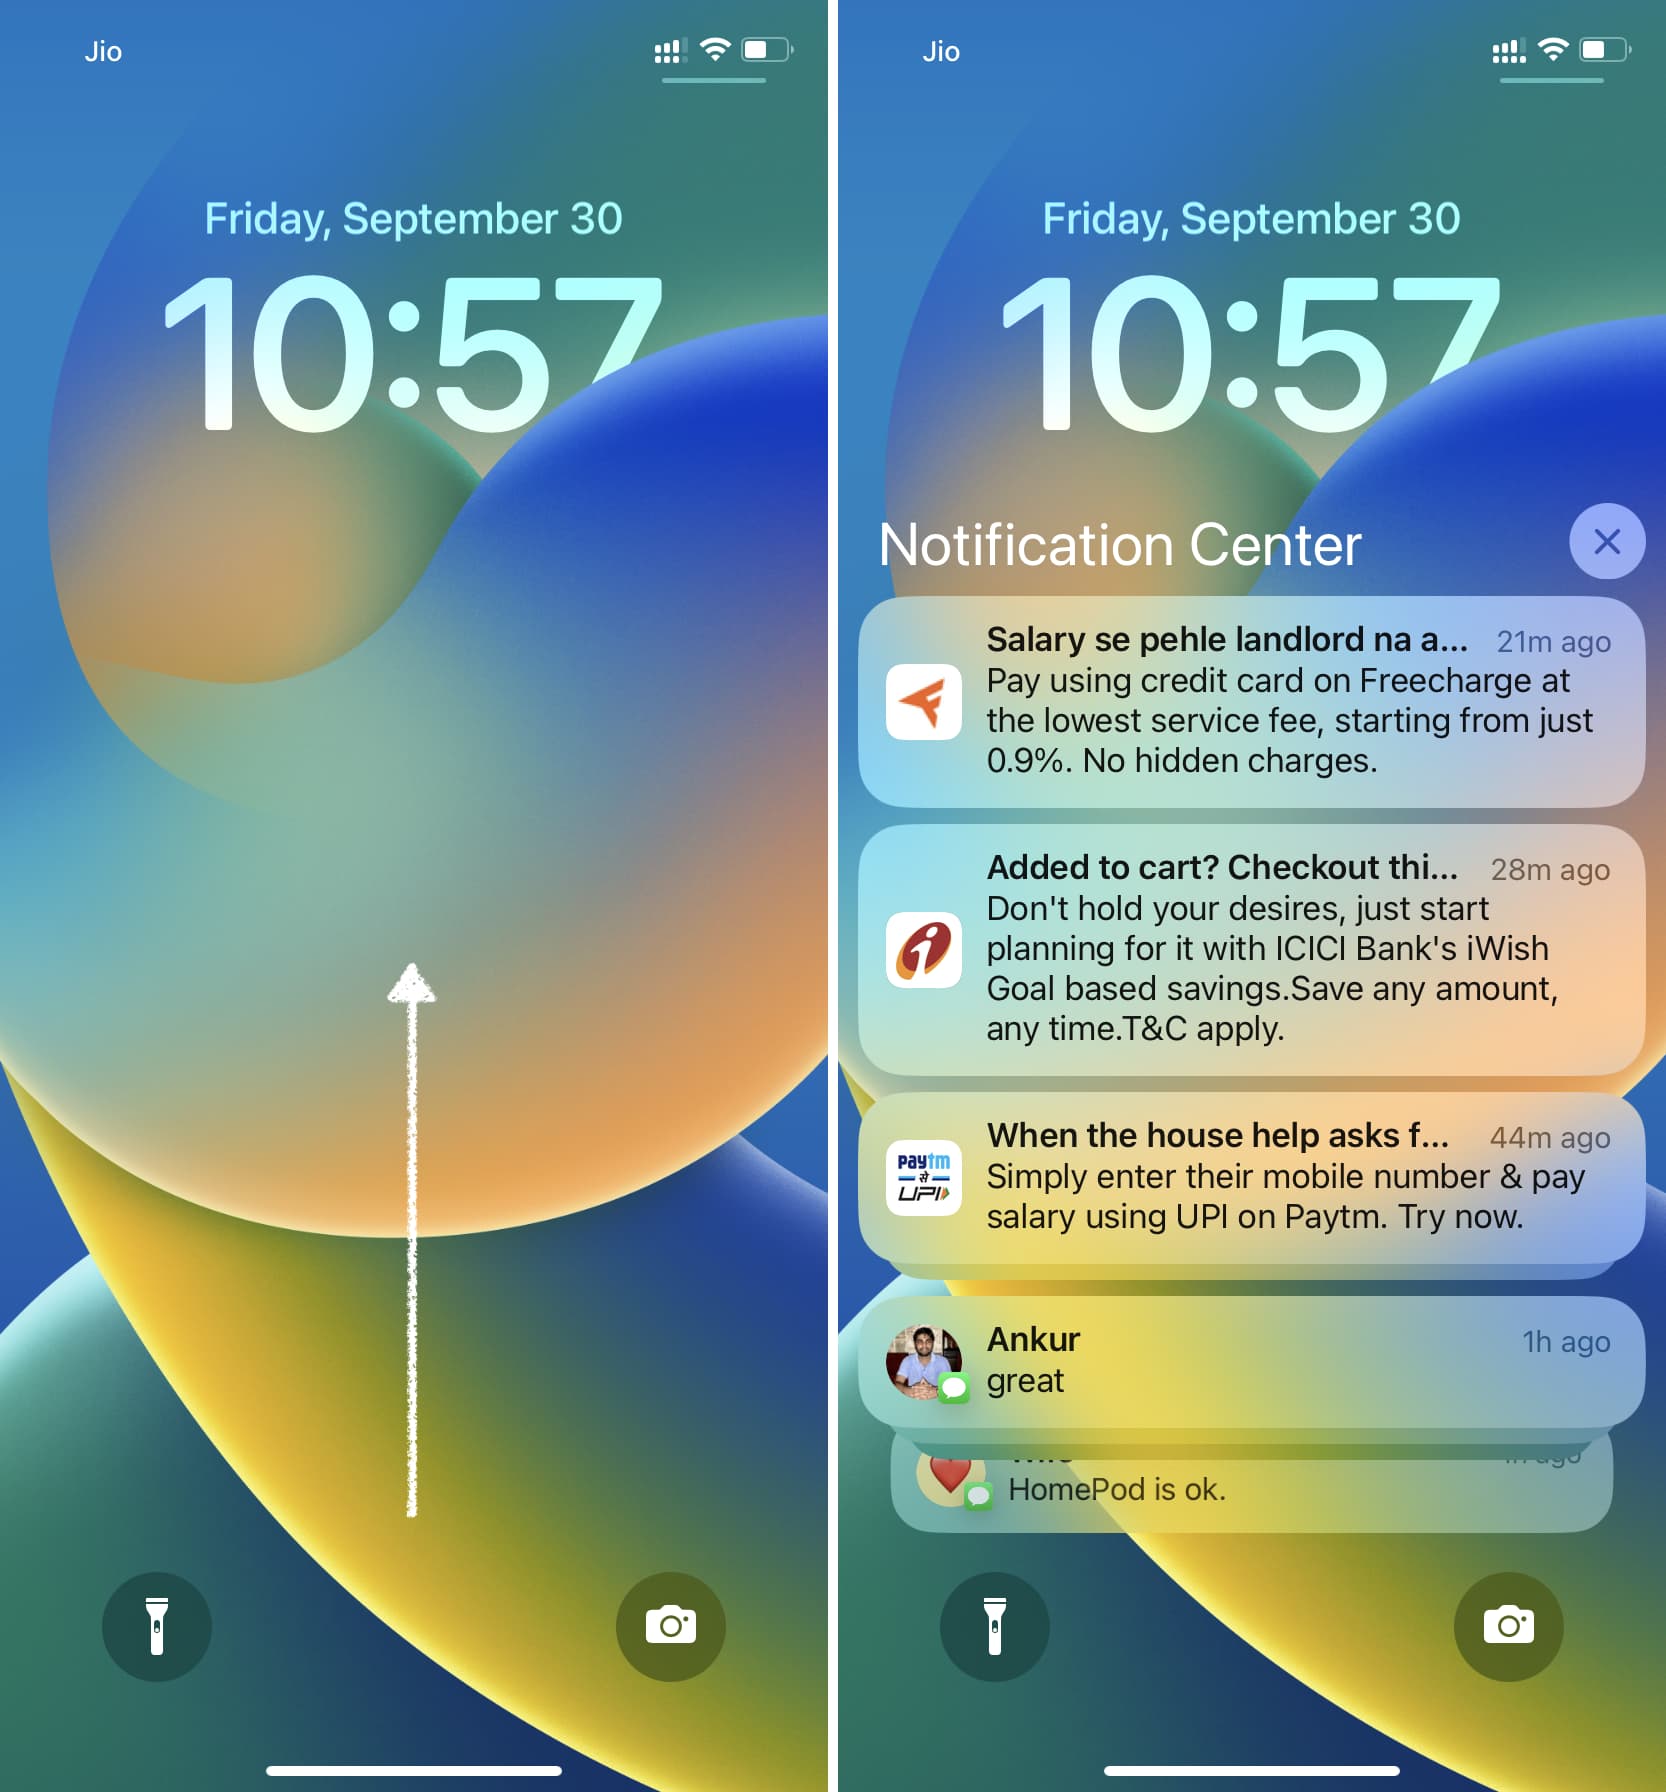 Swipe up on iPhone Lock Screen to see the Notification Center with unread notifications